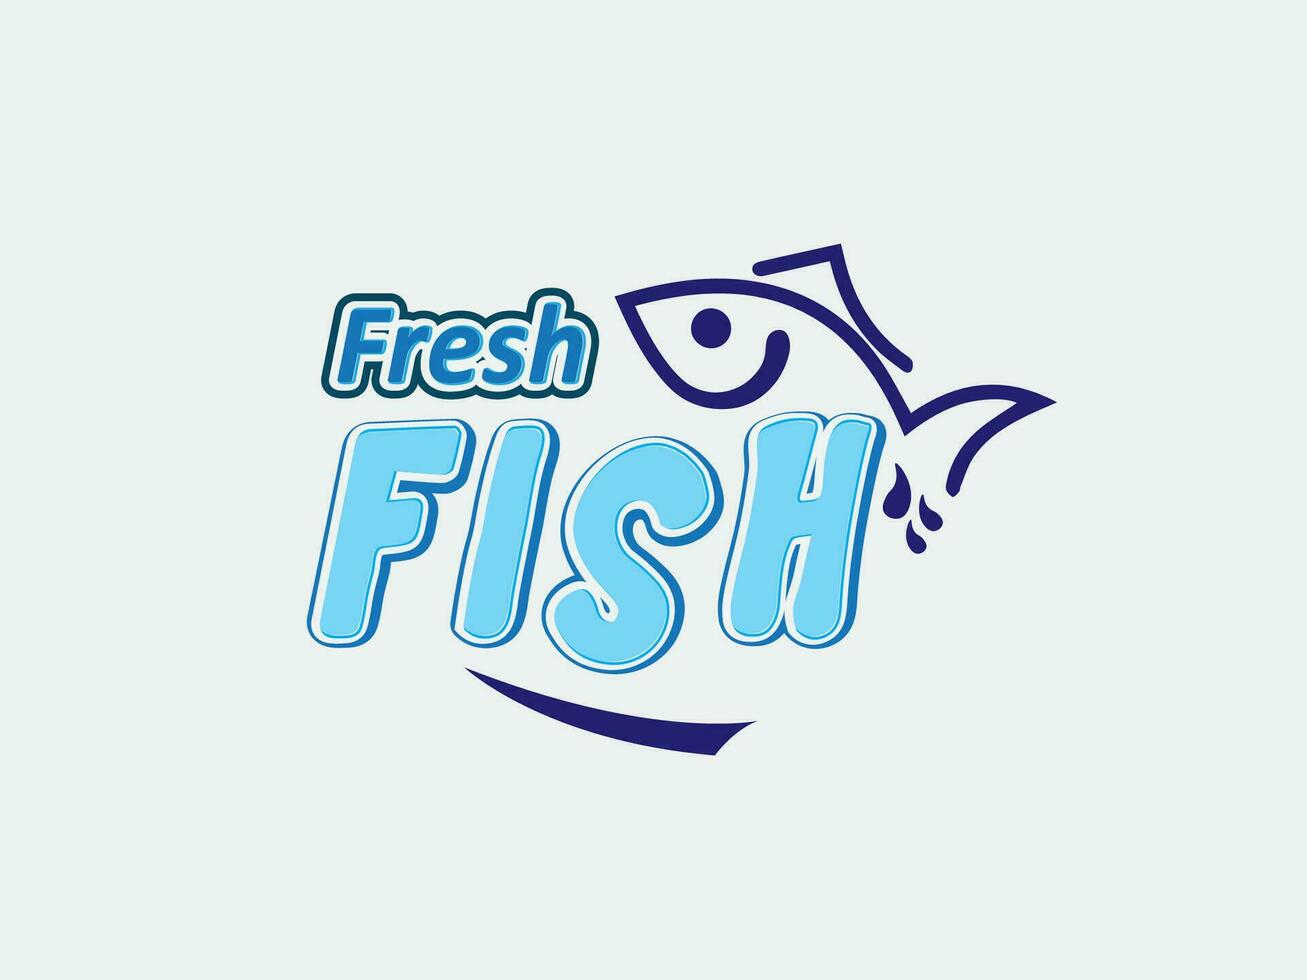 fresh fish logo label packaging vector seafood illustration, fresh fish logo icons  Fish in water Logo design vector template. Seafood restaurant shop store Logotype concept icon.